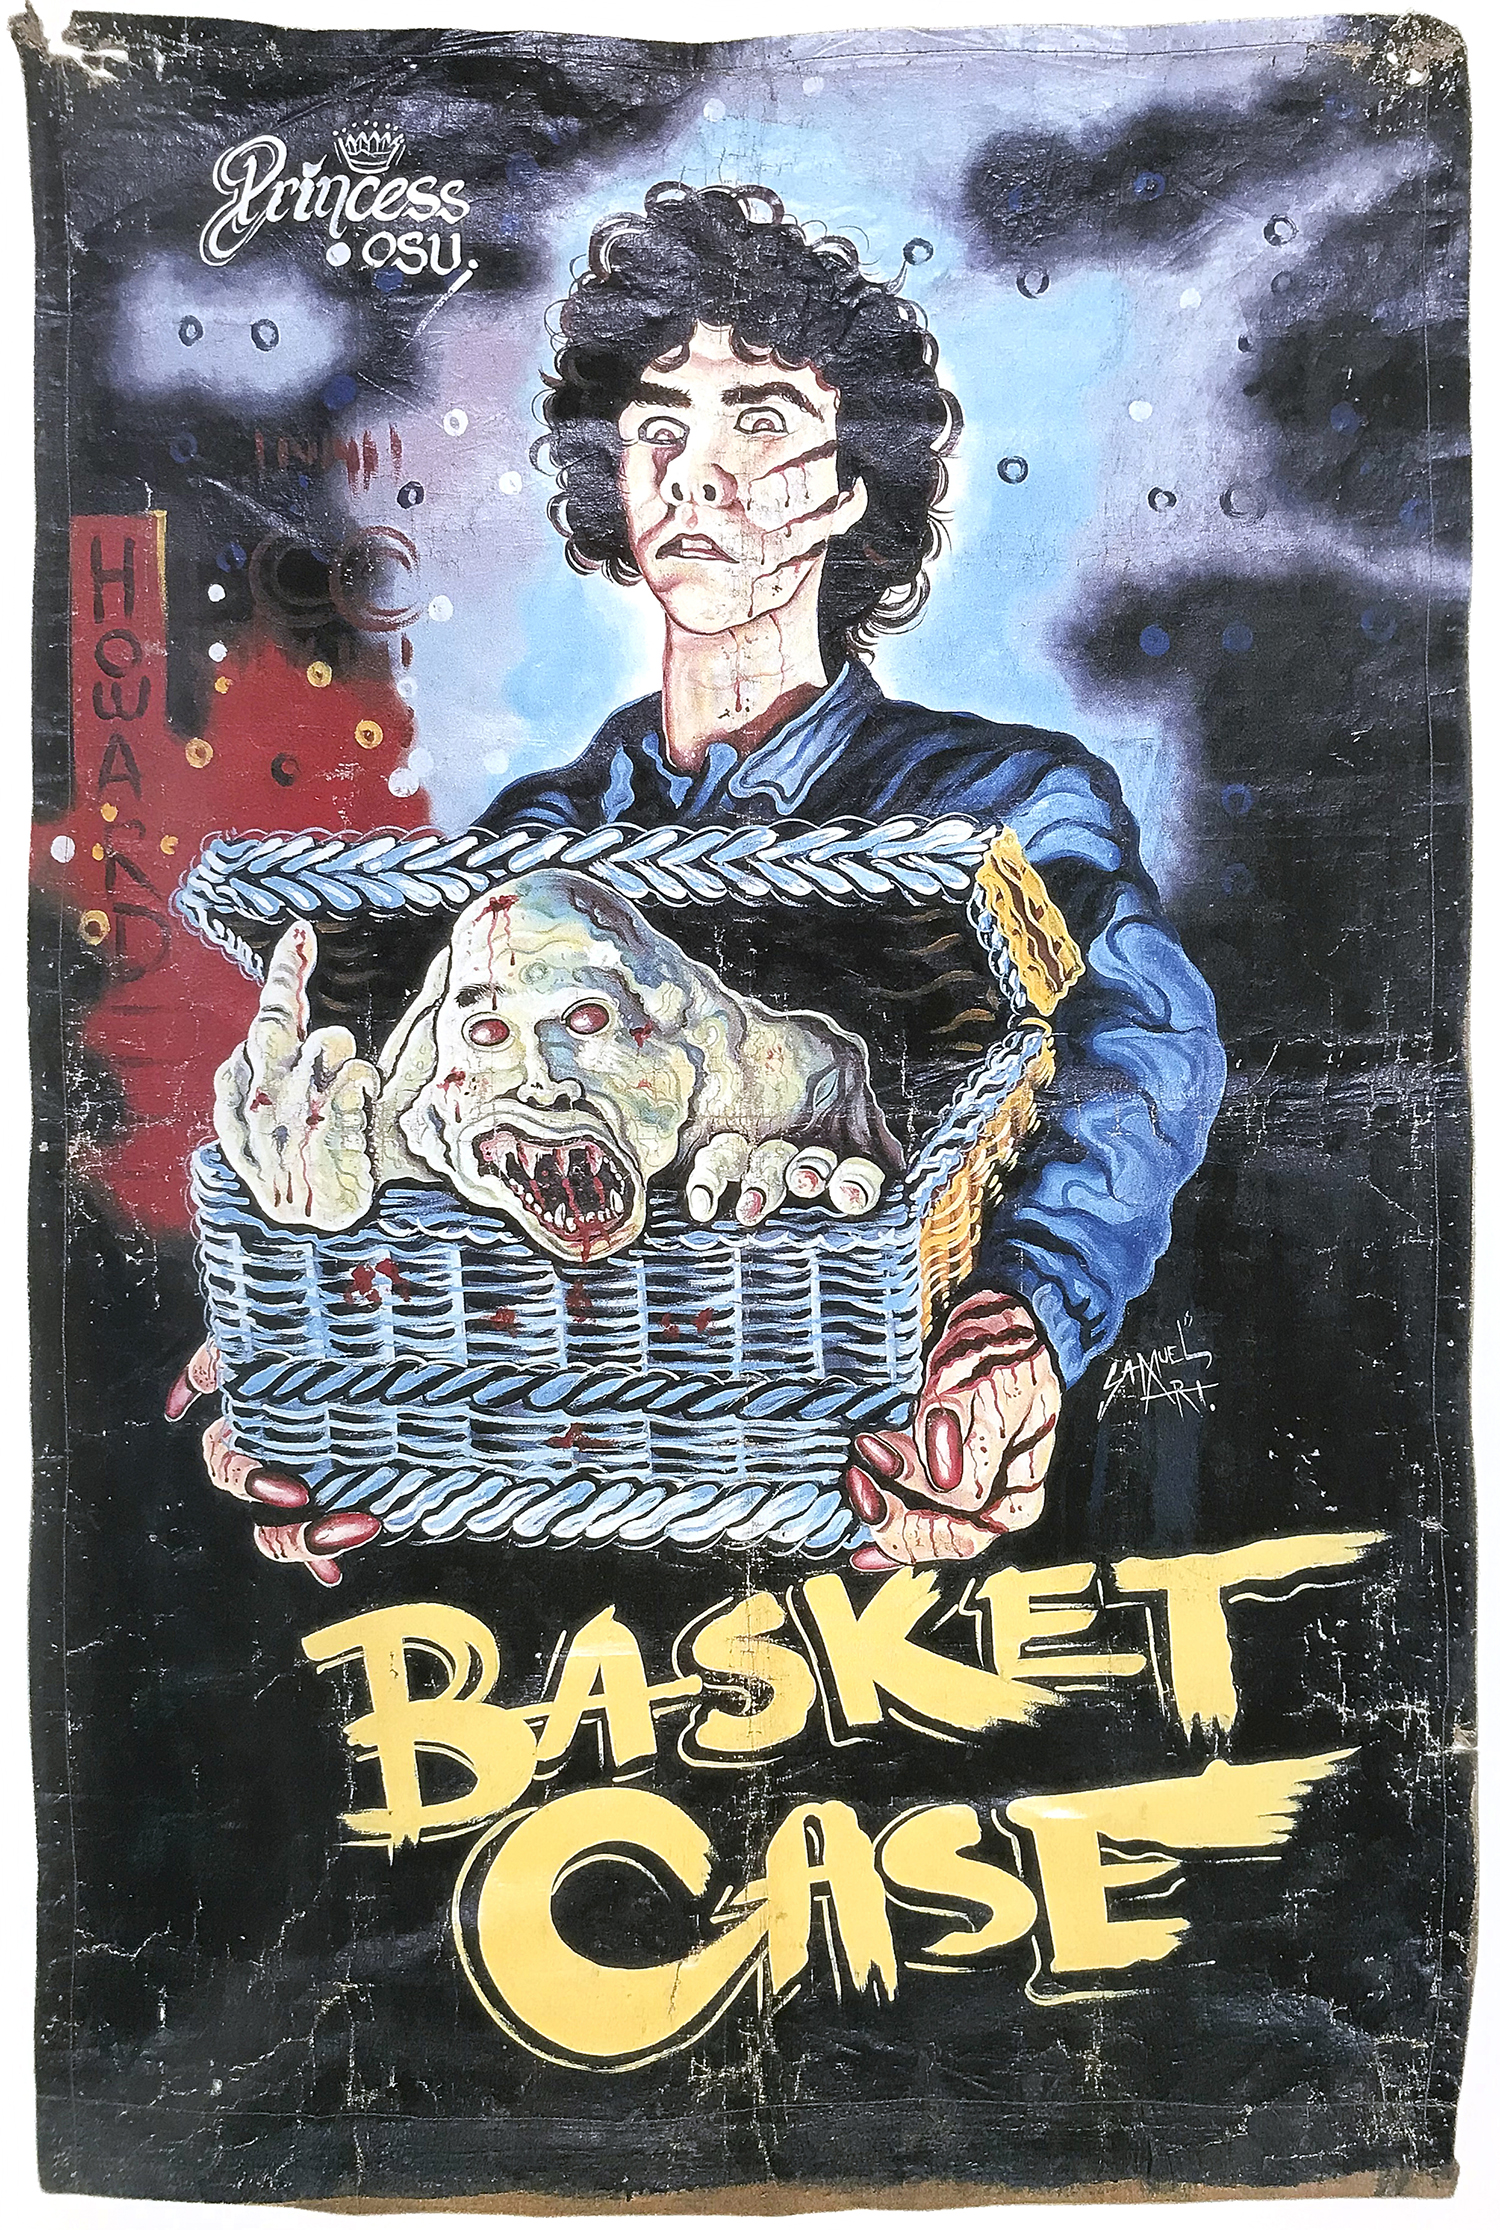 A hand-painted poster of a man with short curly hair holding a chest with a creature inside.